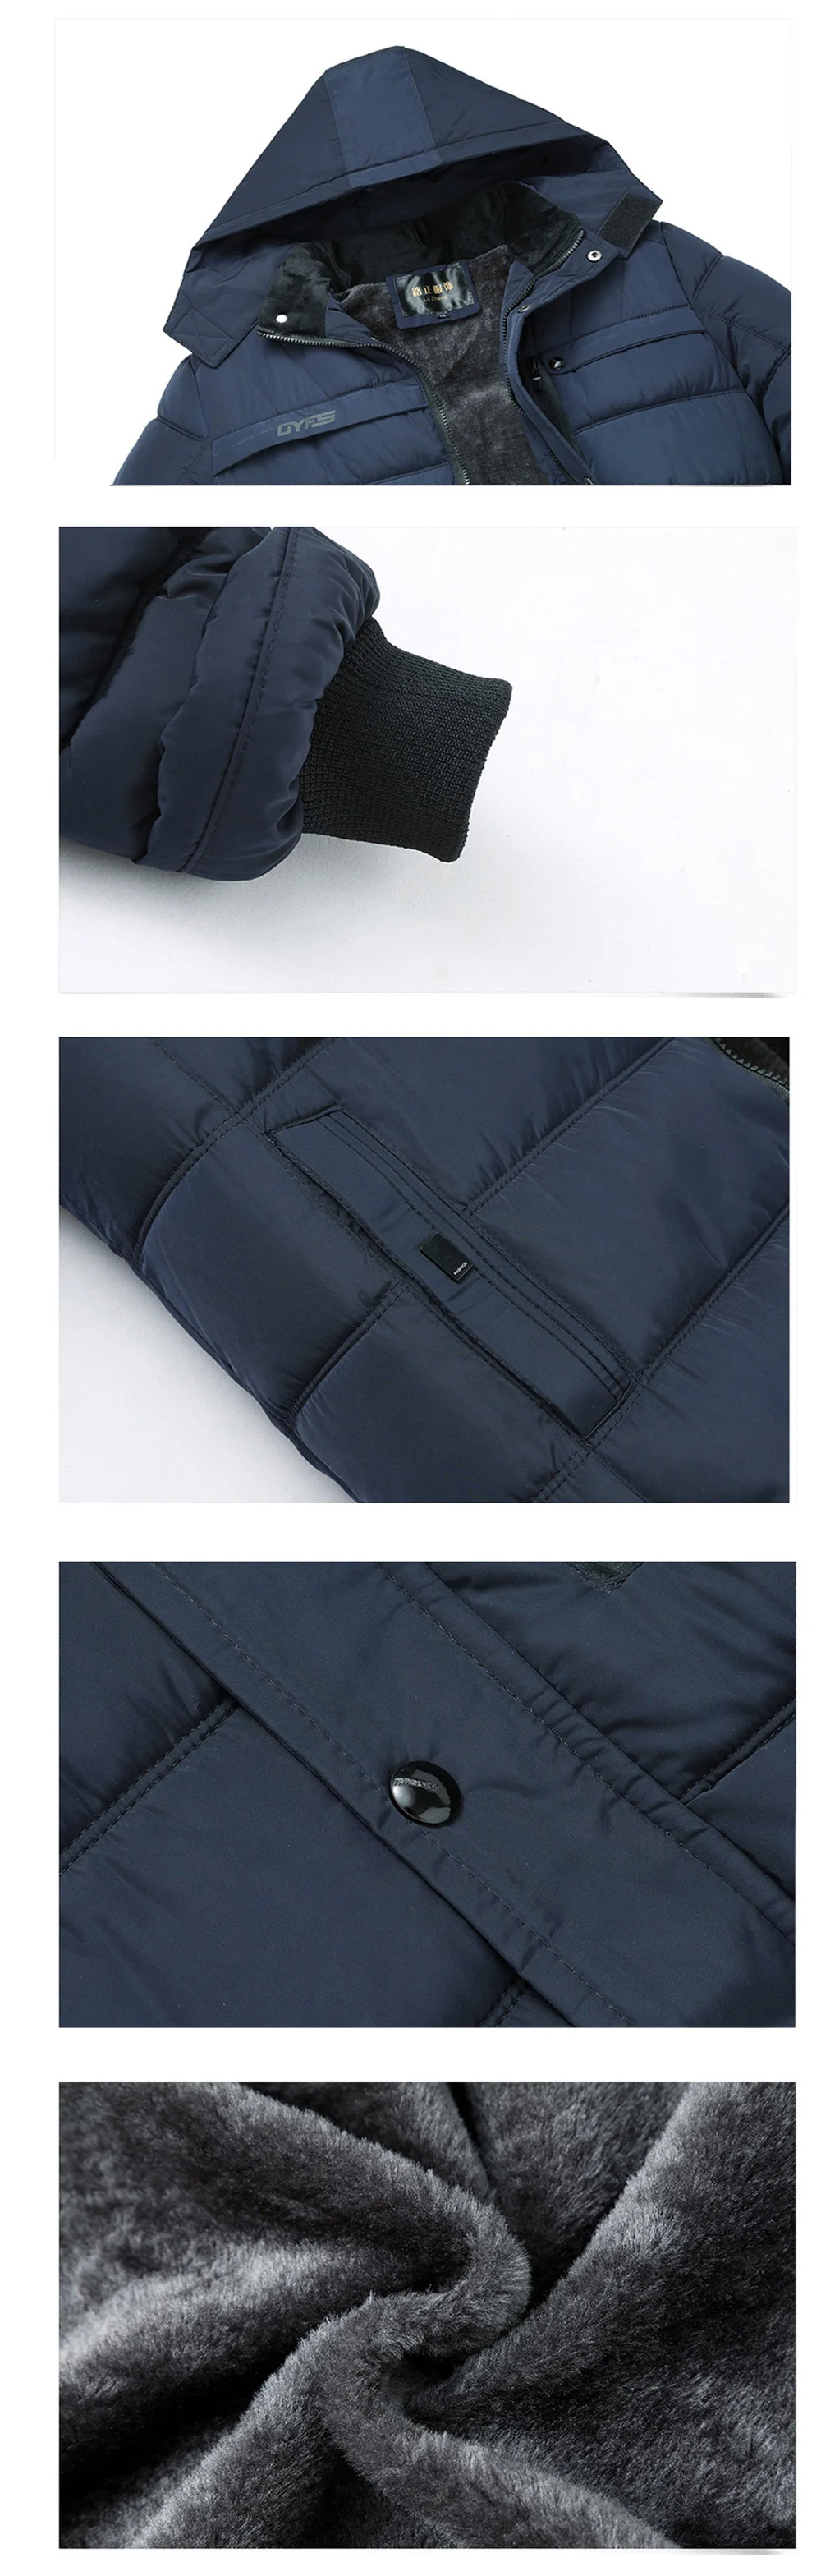 DIMUSI Winter Mens Jackets Male Outwear Thick Warm Hooded Parkas Coats Mens Stand Collar Slim Fit Windbreaker Jackets Clothing